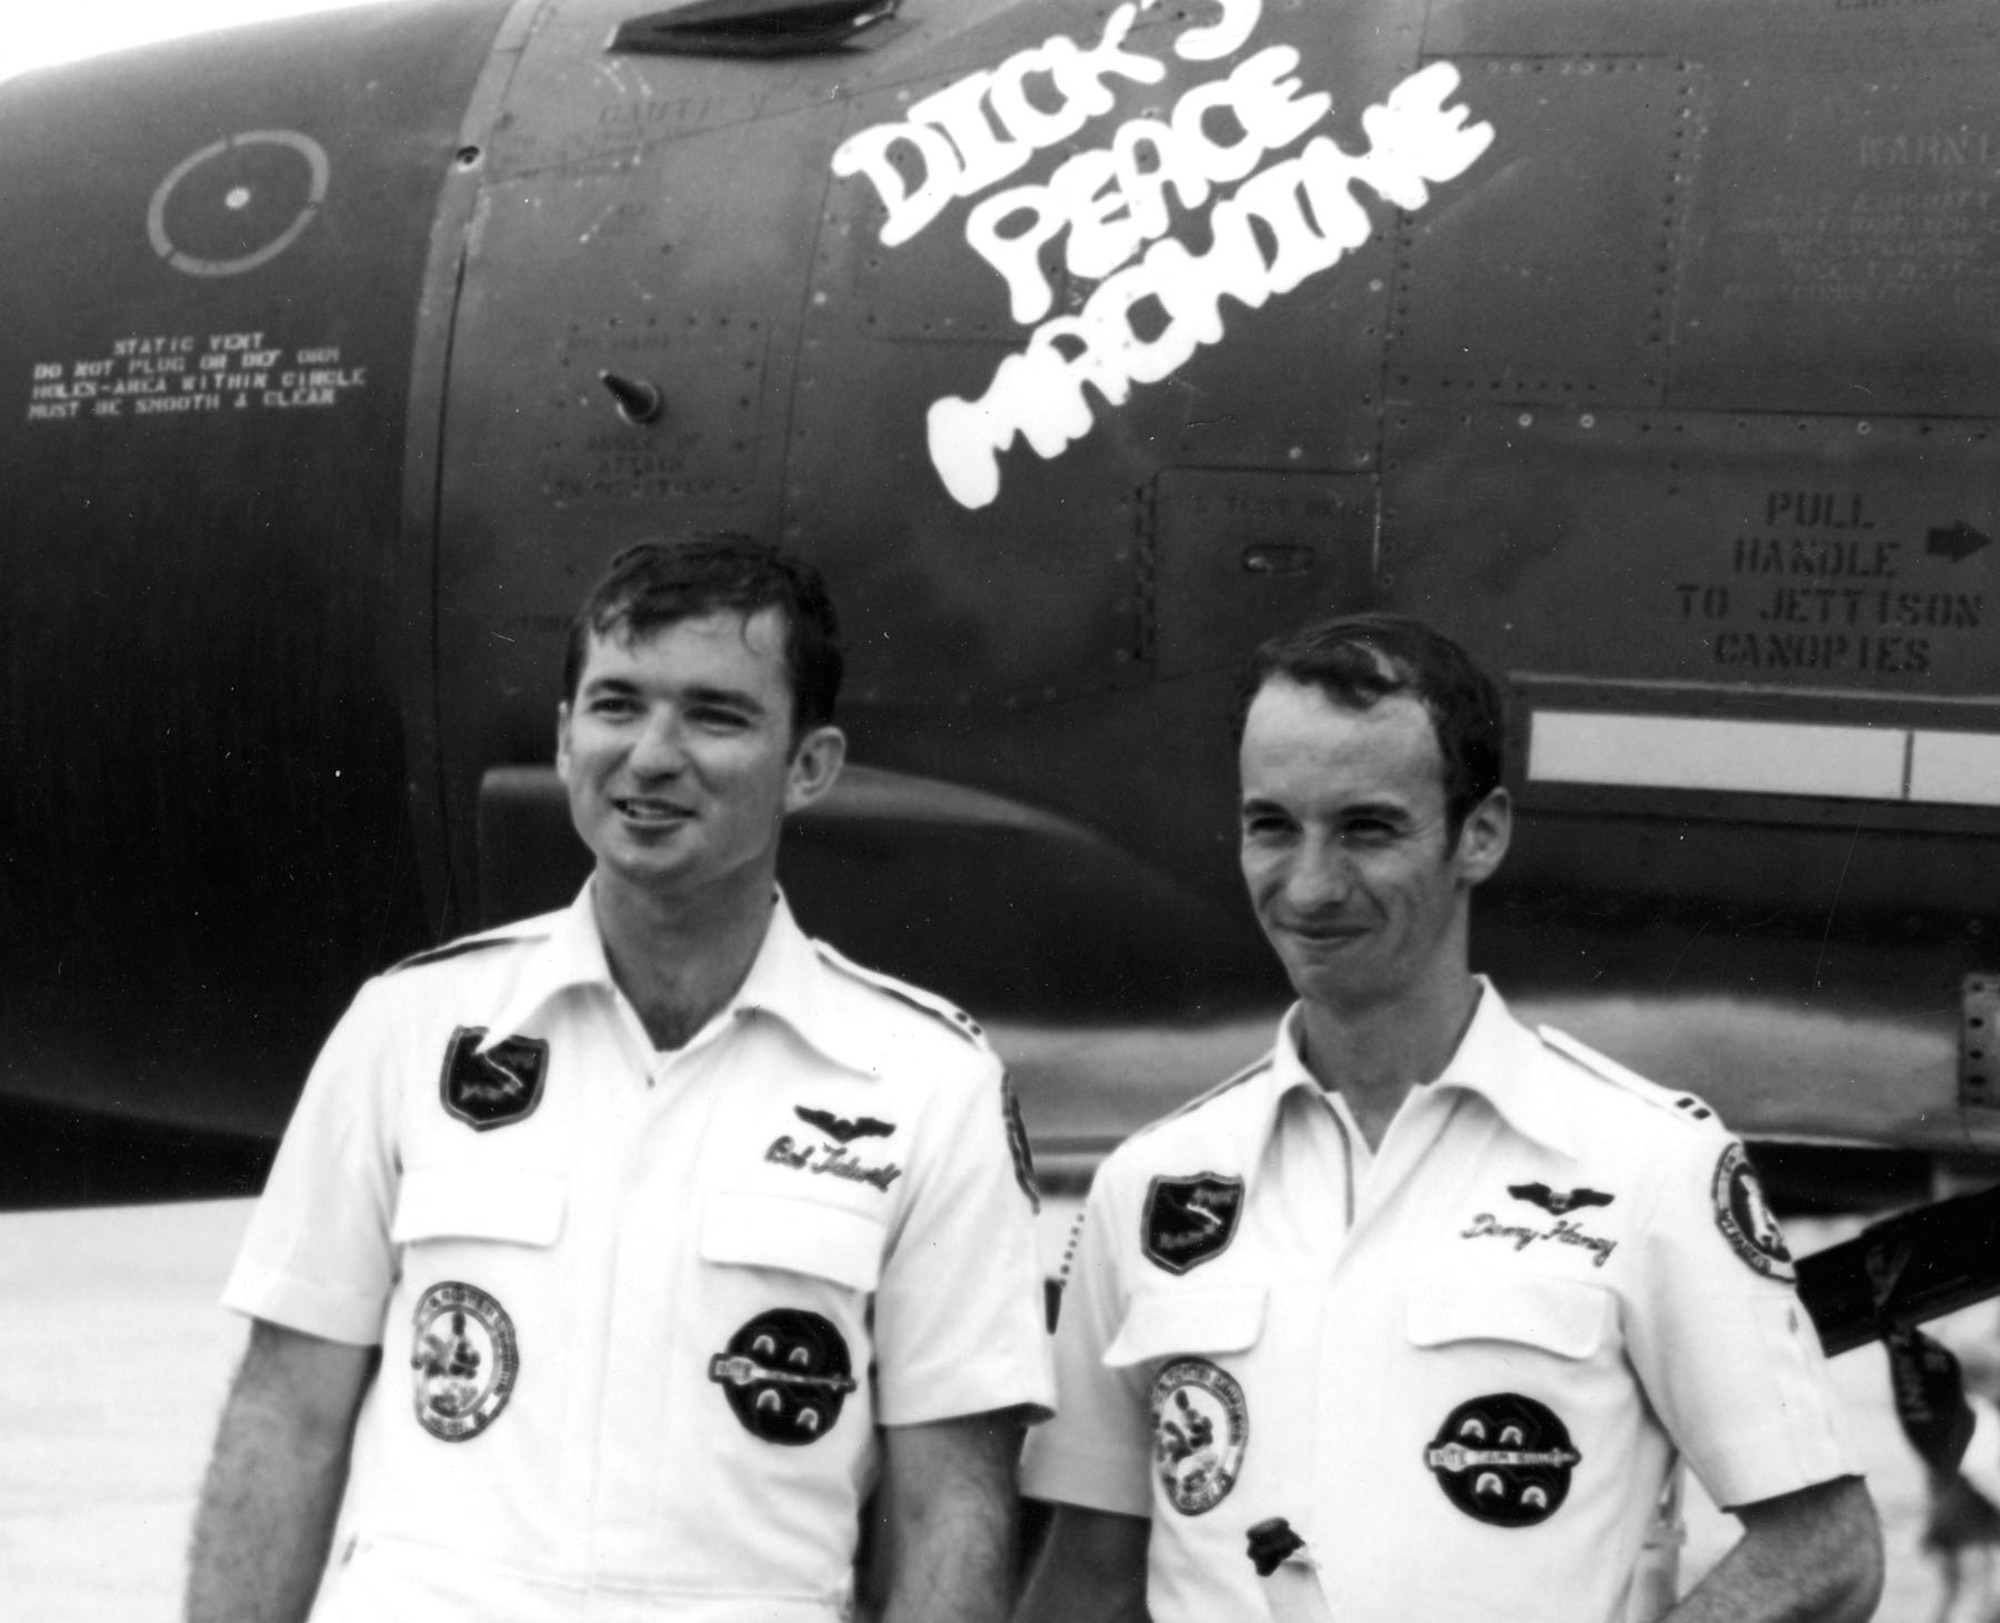 Capt. Robert Tidwell (l) and Capt. Dennis Haney (r)—two of the eighteen Wild Weasel F-4C crewmen who flew in LINEBACKER operations—shortly after the war ended. (U.S. Air Force photo)